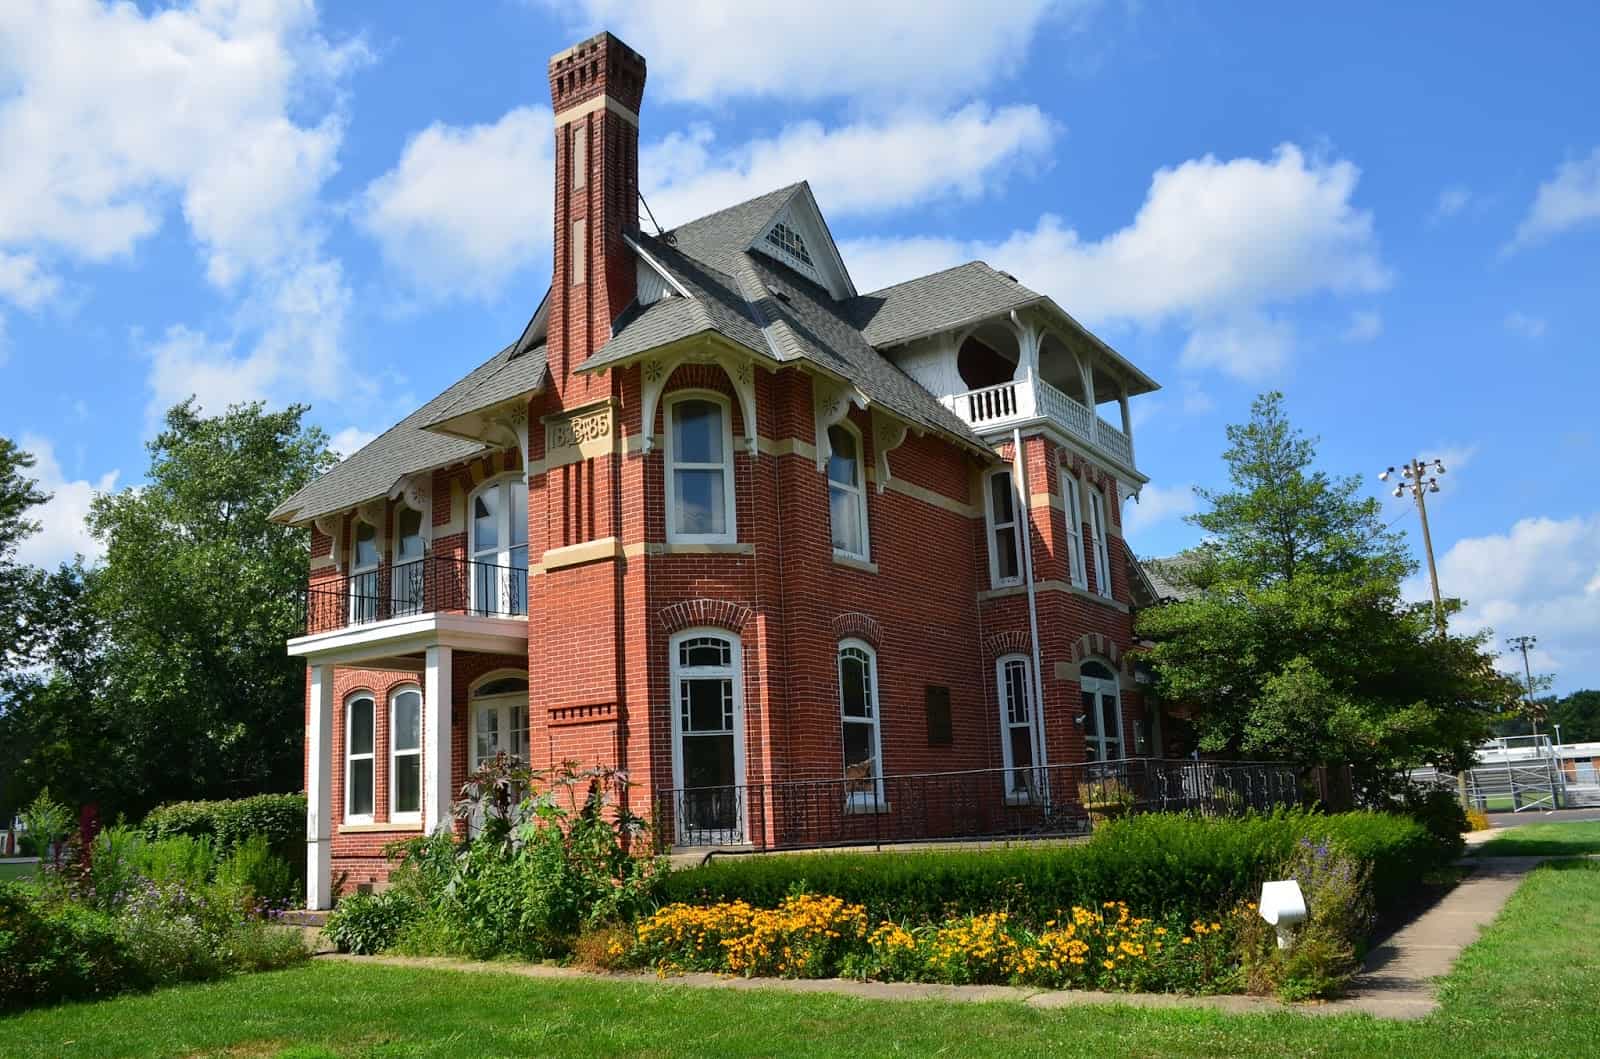 Brown Mansion in Chesterton, Indiana